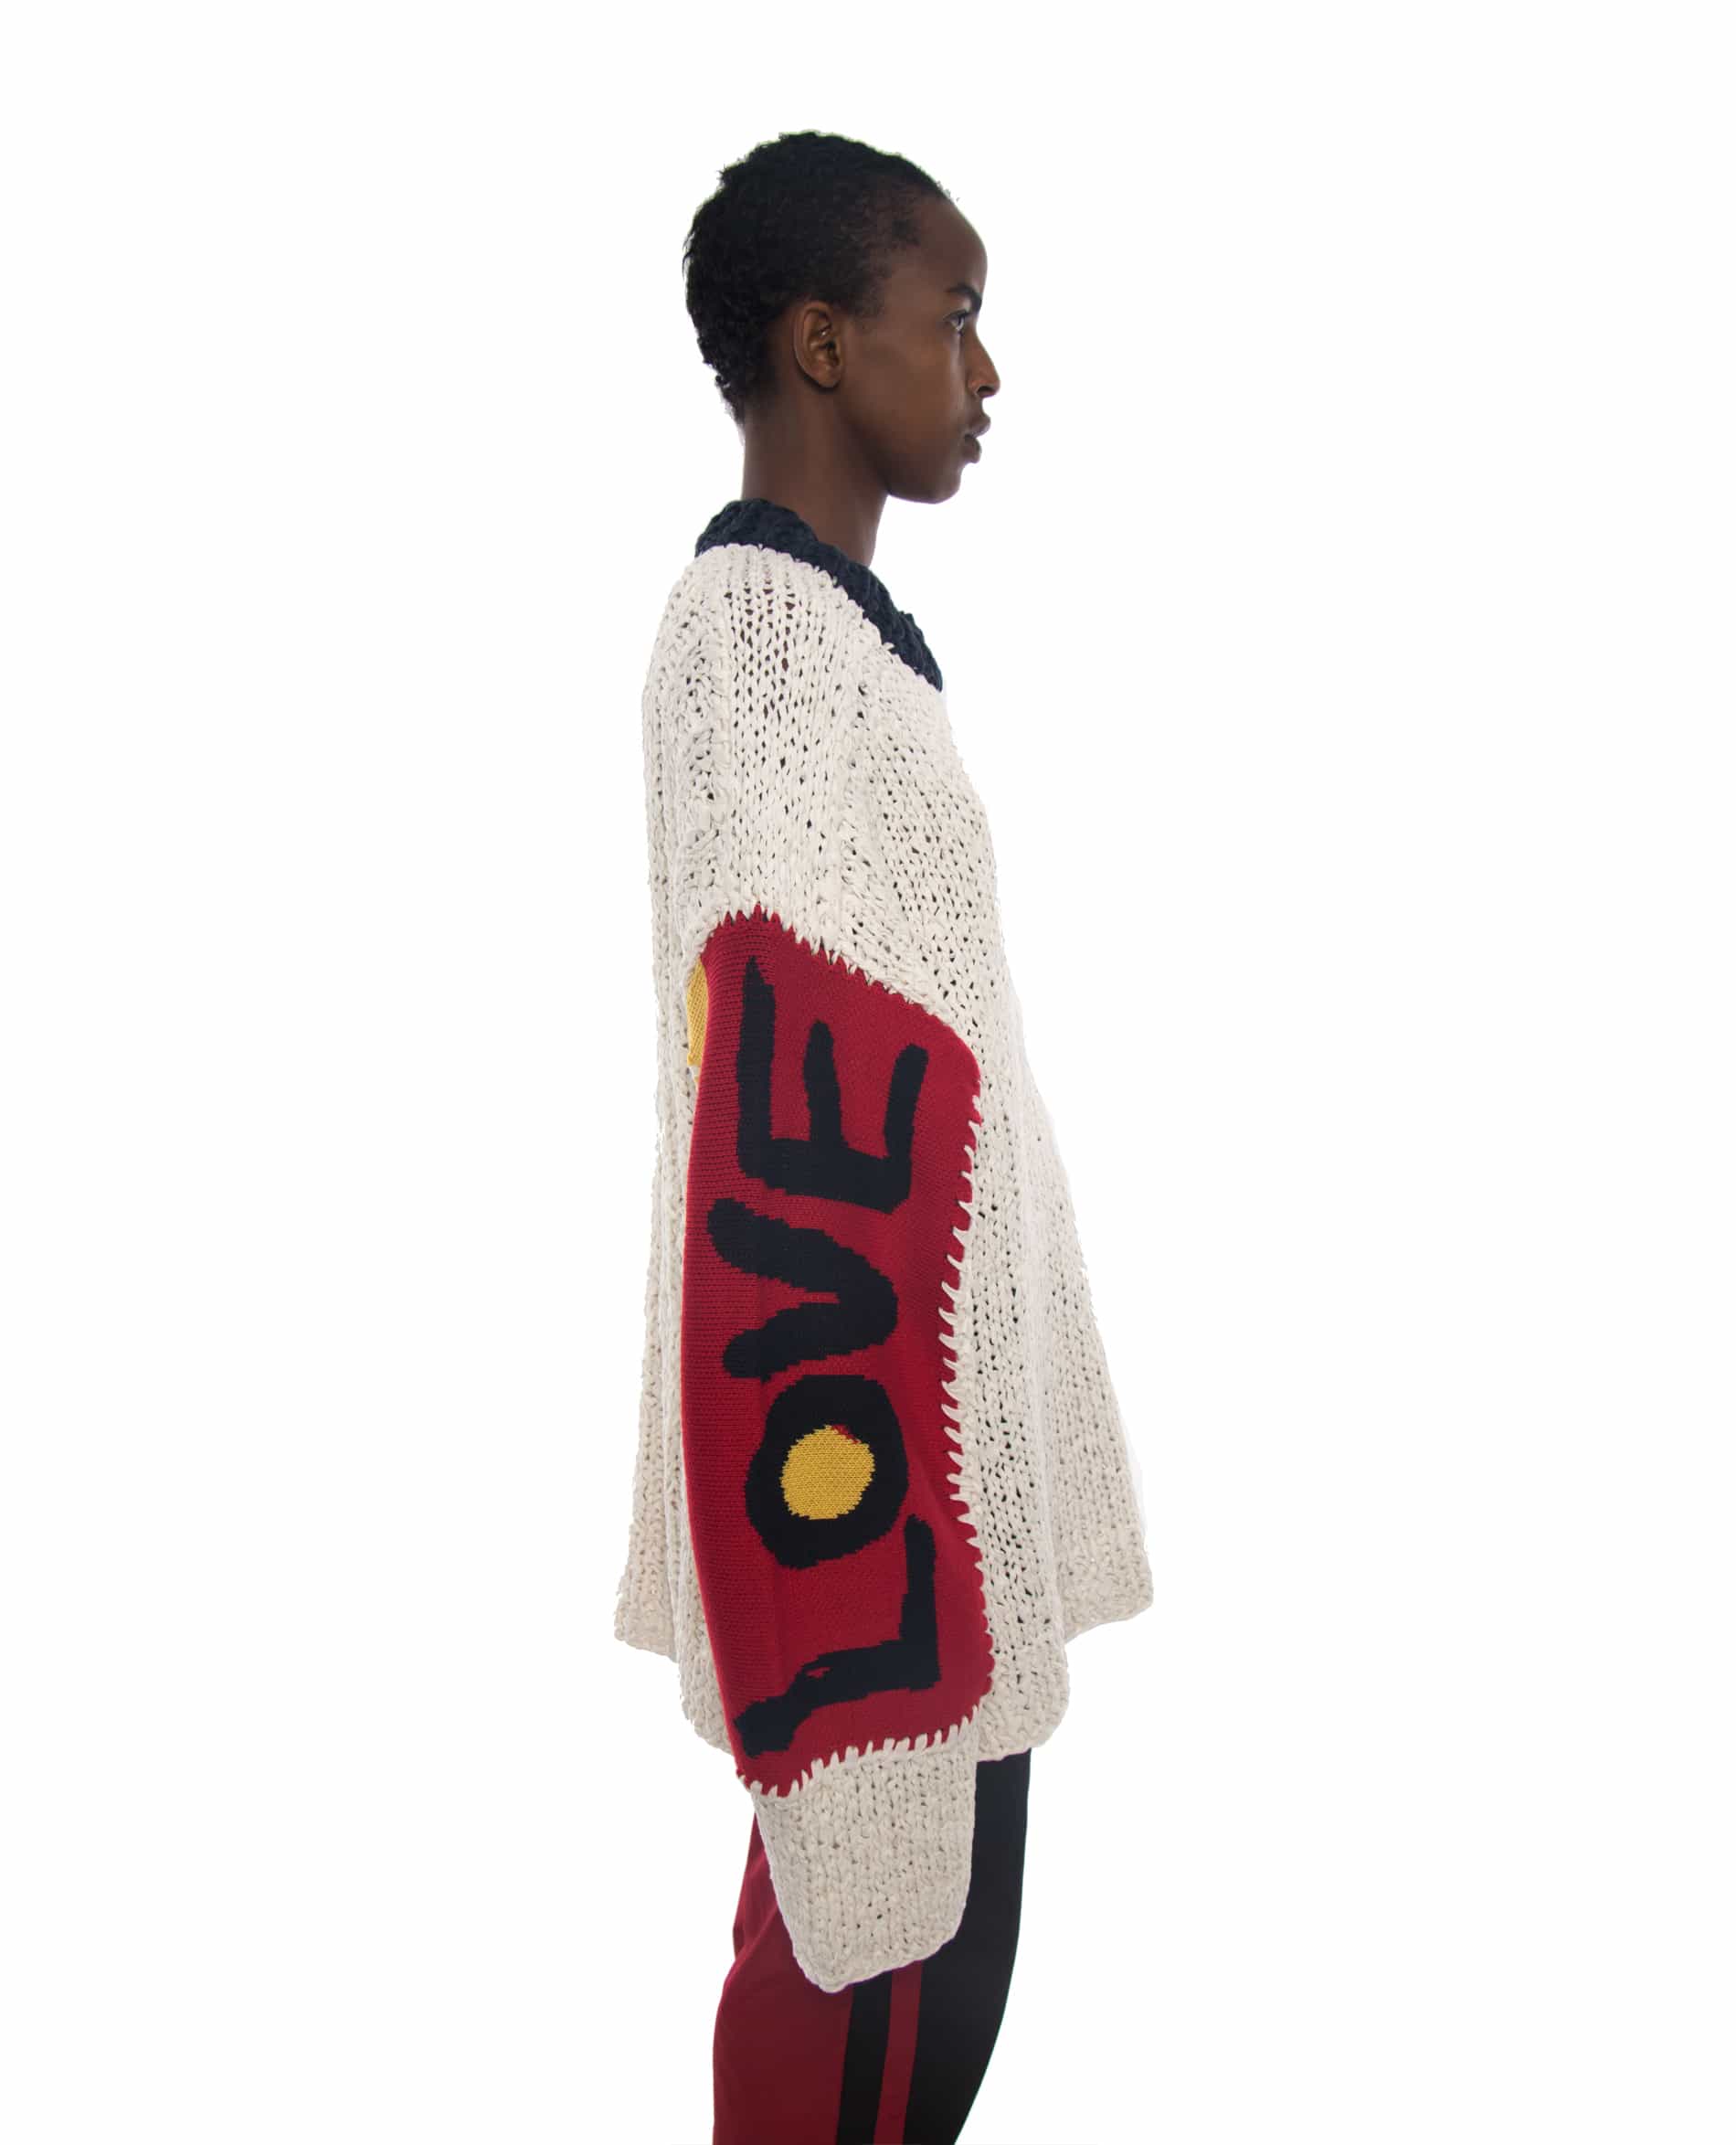 Love/Life Knitted Sweater